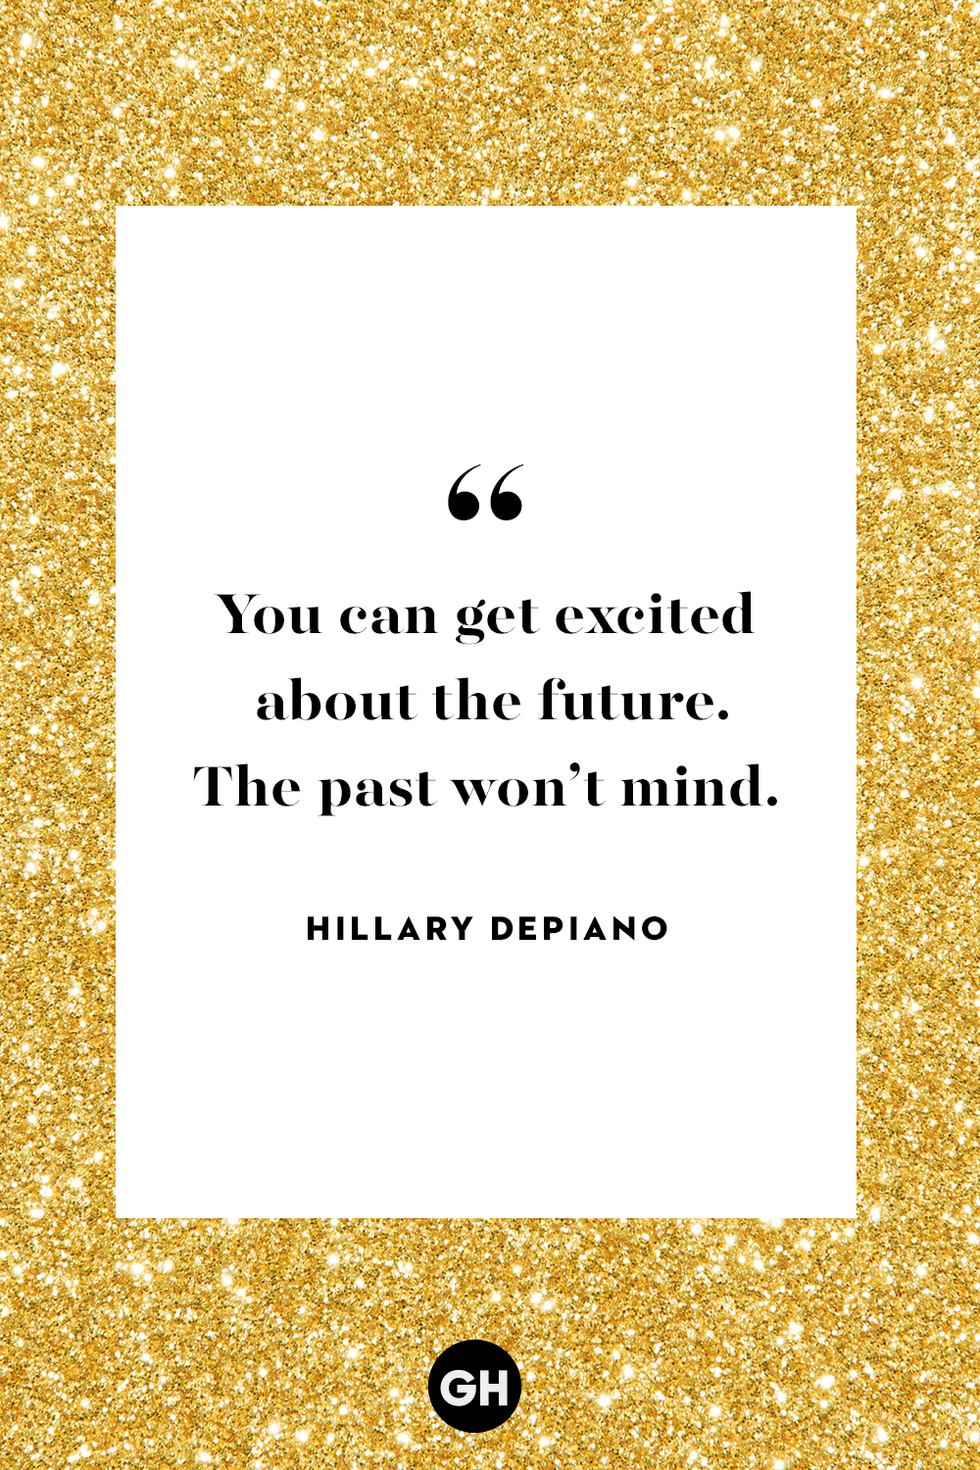 new years eve quote by hillary depiano